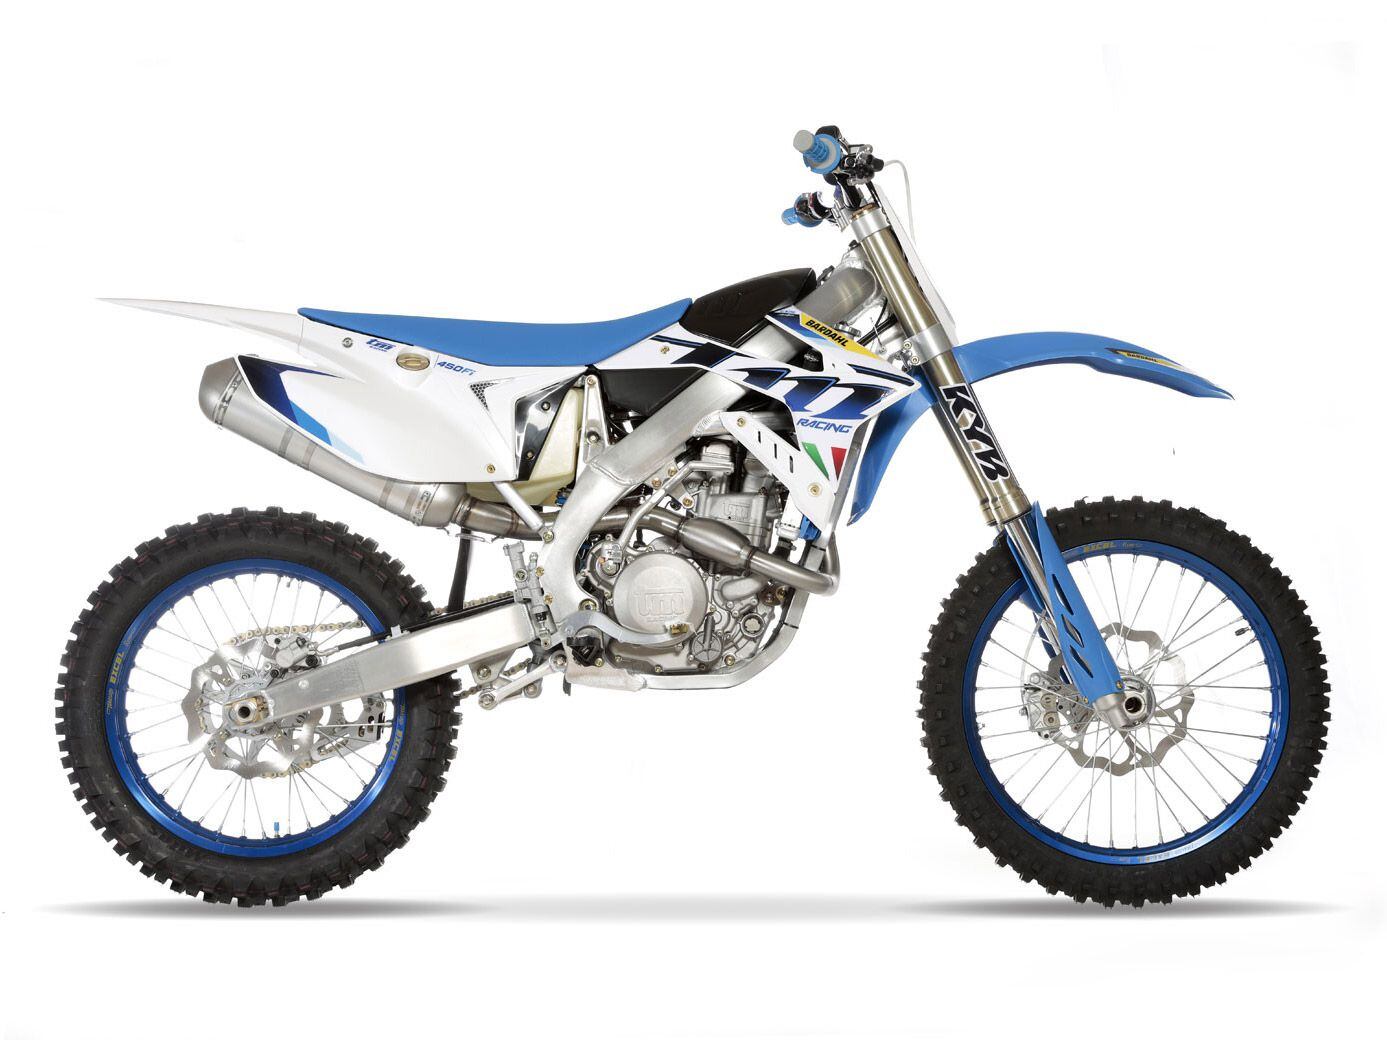 Looking for something different? TM’s MX 450 Fi is a unique motocross bike straight from Italy.